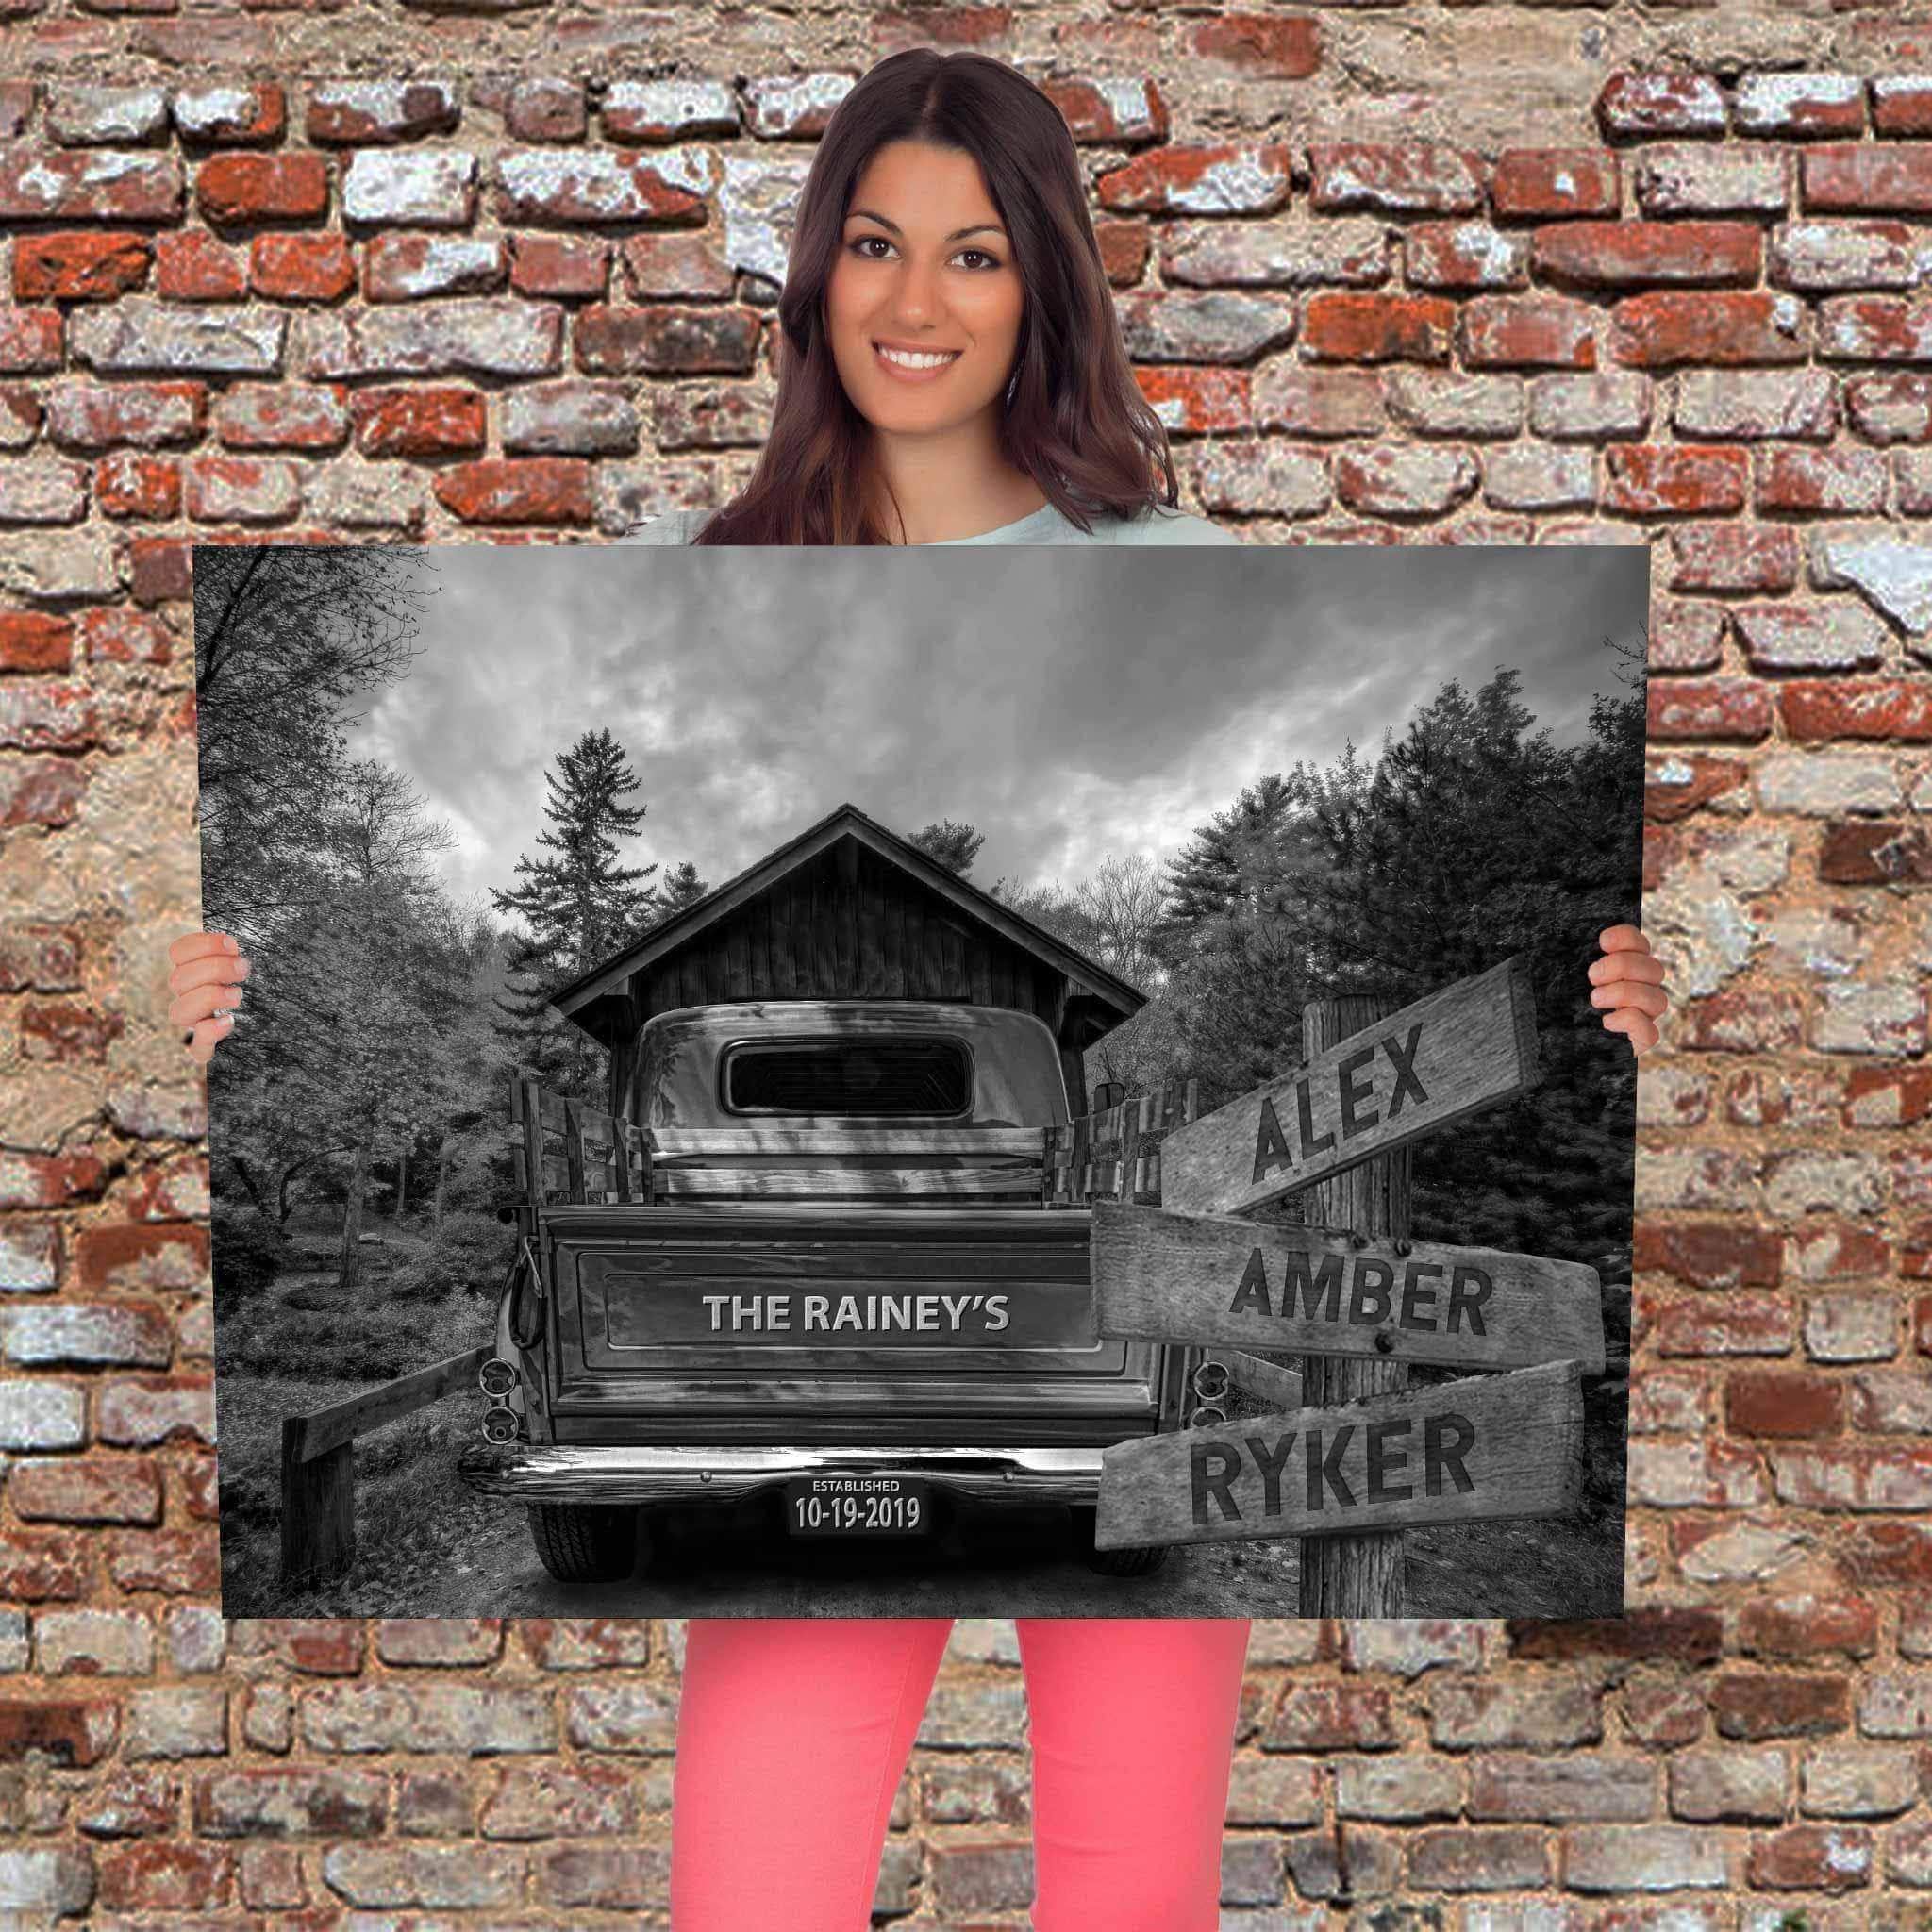 Vintage Truck B&W On Covered Bridge Personalized Tailgate, License Plate & Directional Sign CanvasCustomly Gifts